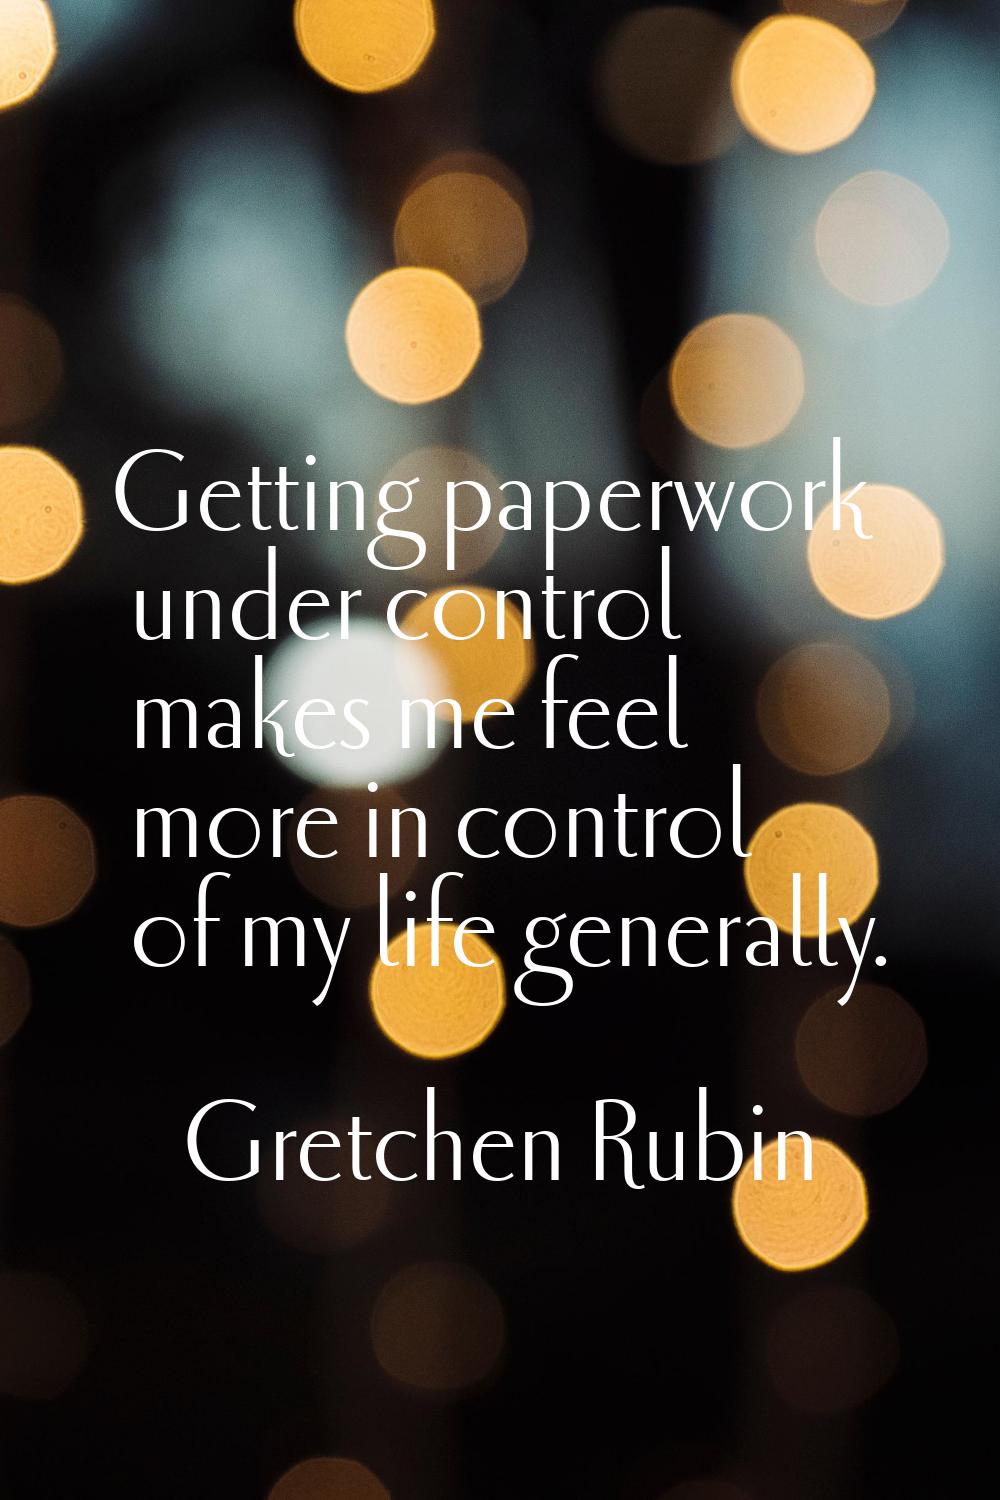 Getting paperwork under control makes me feel more in control of my life generally.